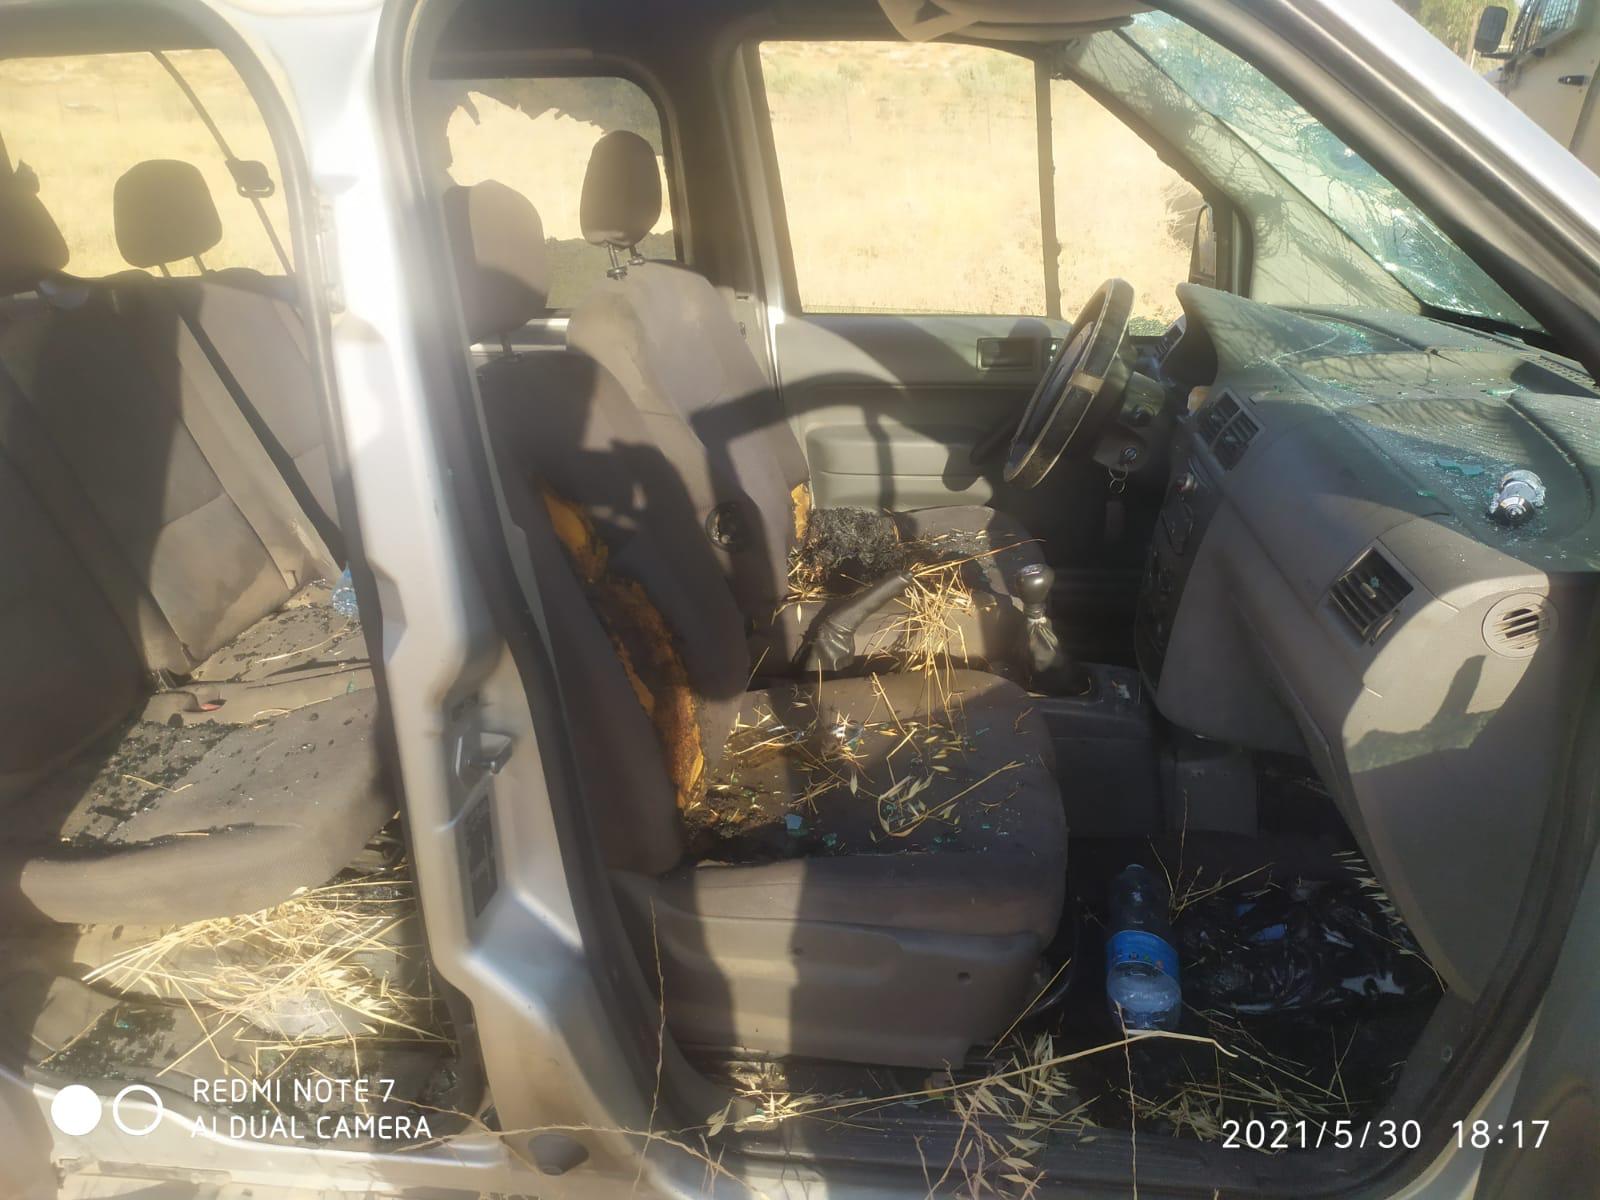 One of the cars vandalized by the settlers. Photo courtesy of the farmers 